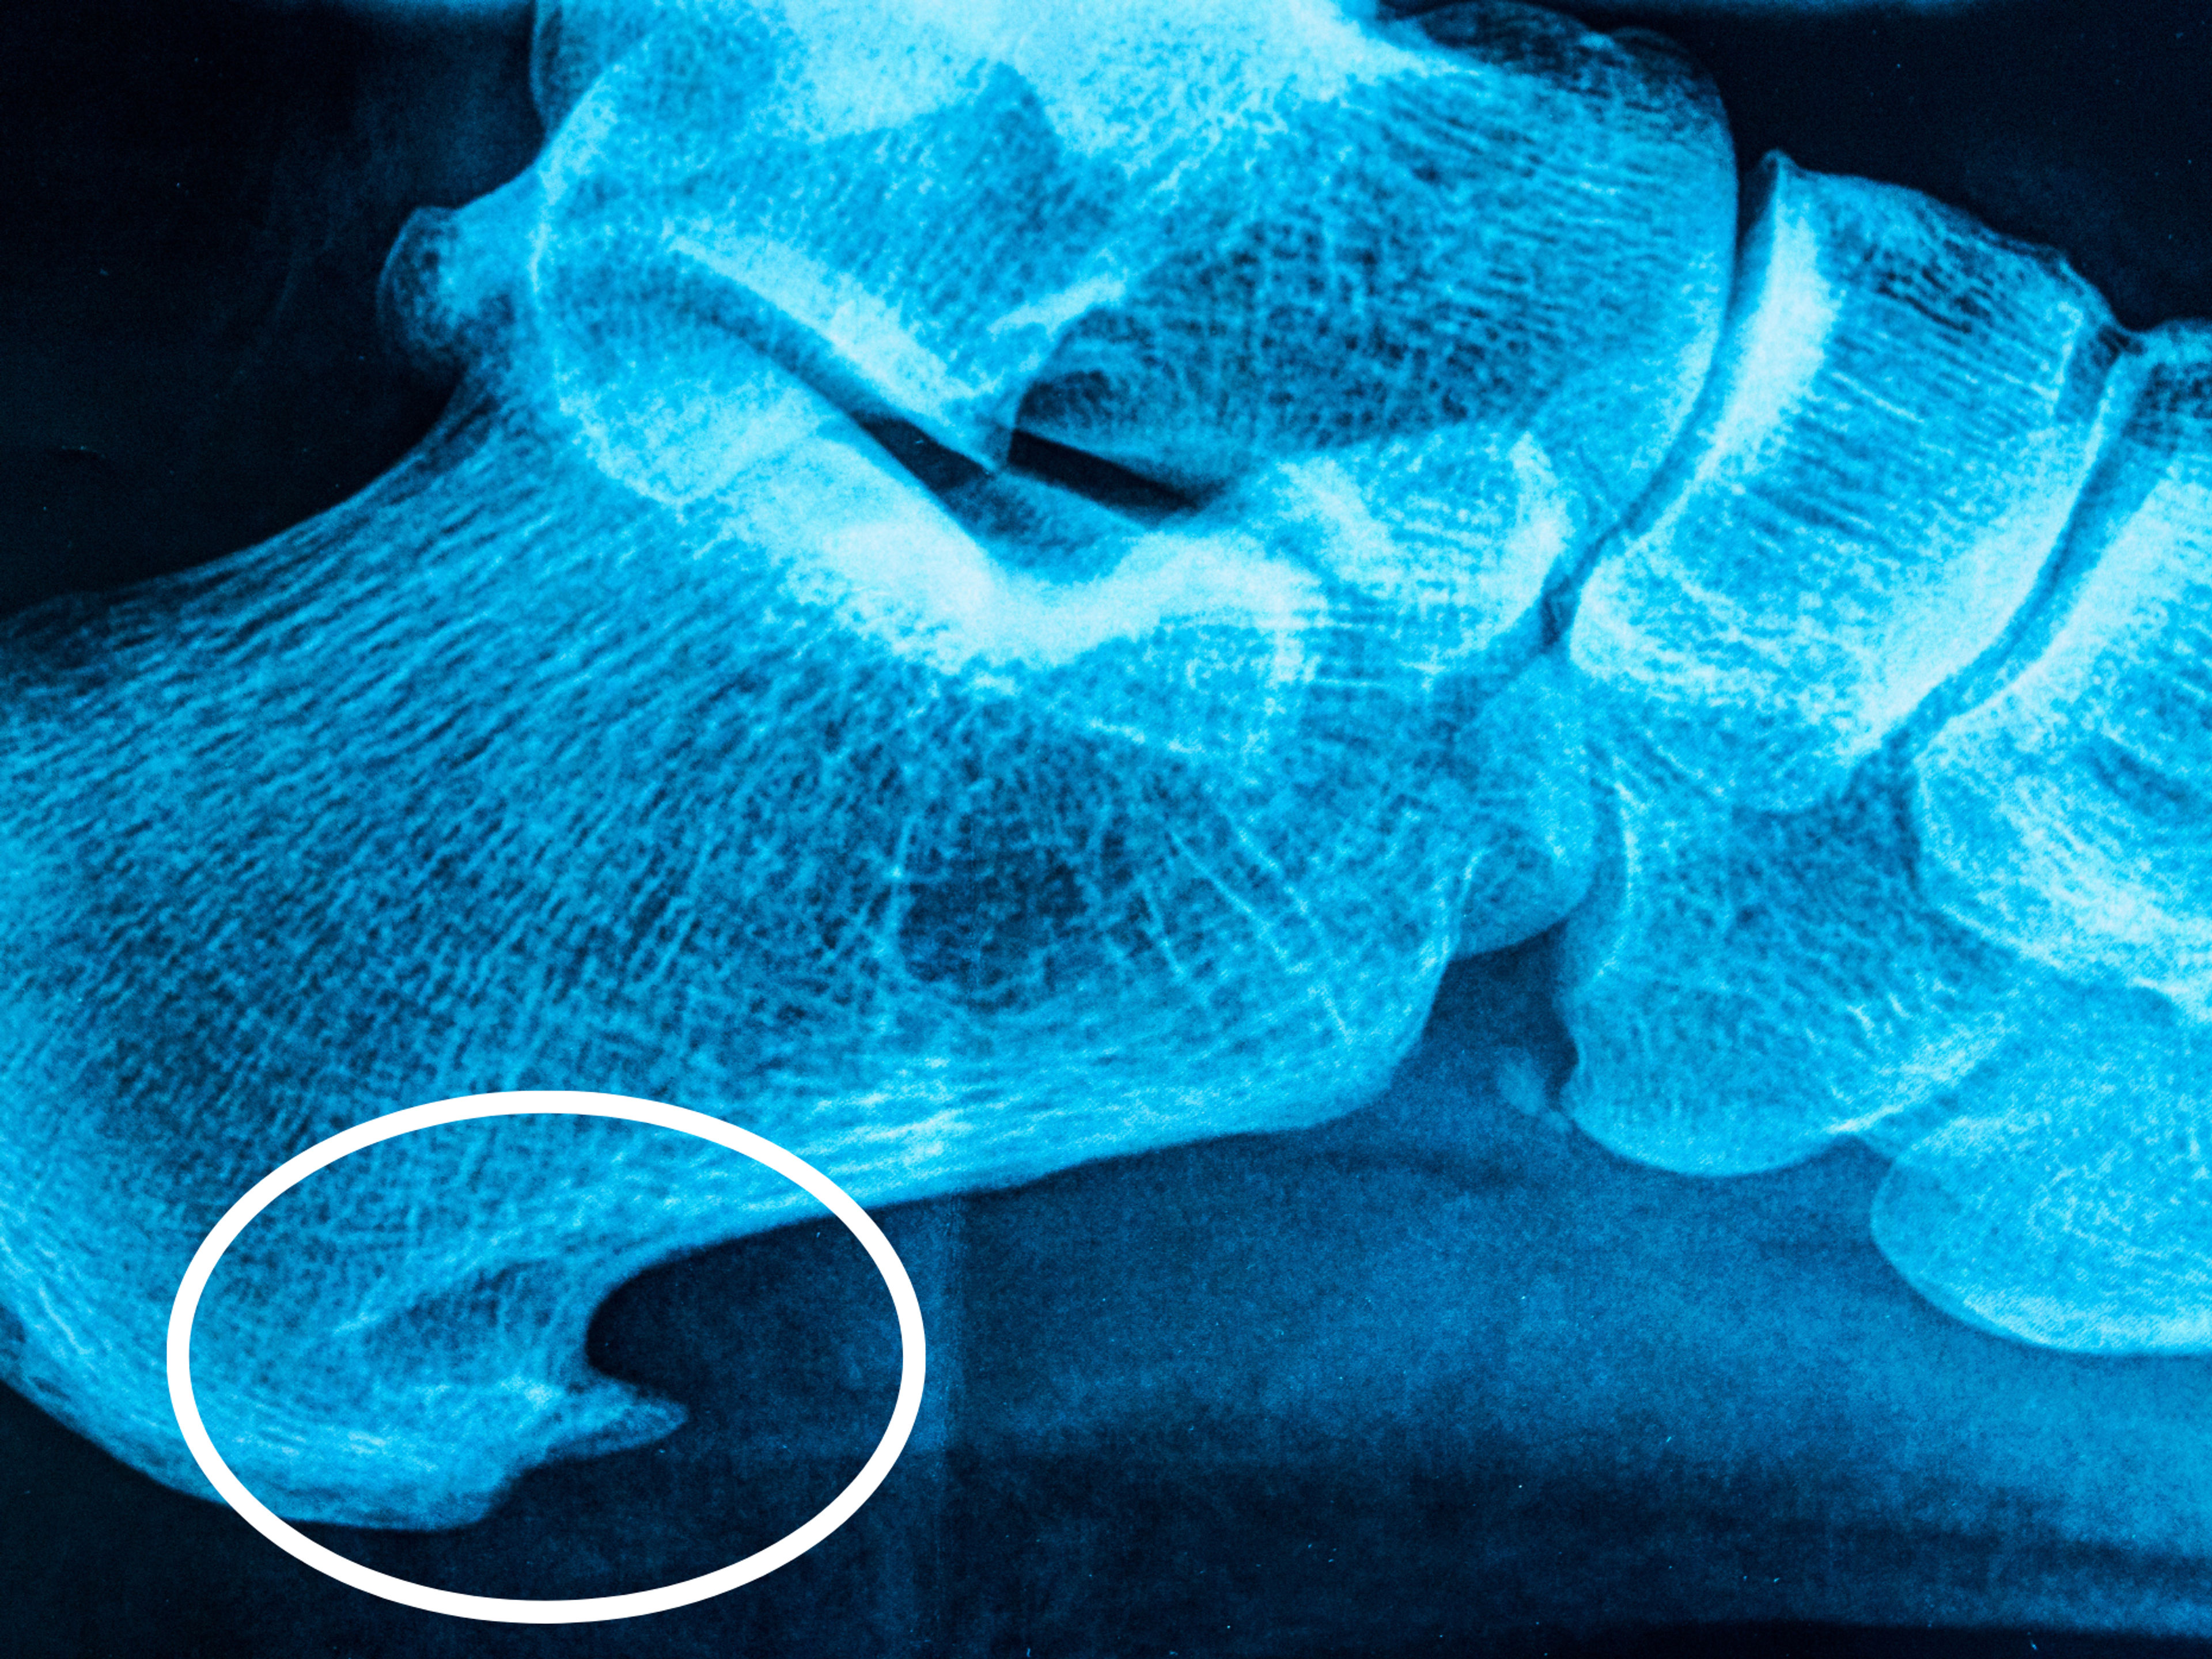 Heel spurs appear on x-rays as bony points in the area where the plantar fascia attaches to the heel bone.